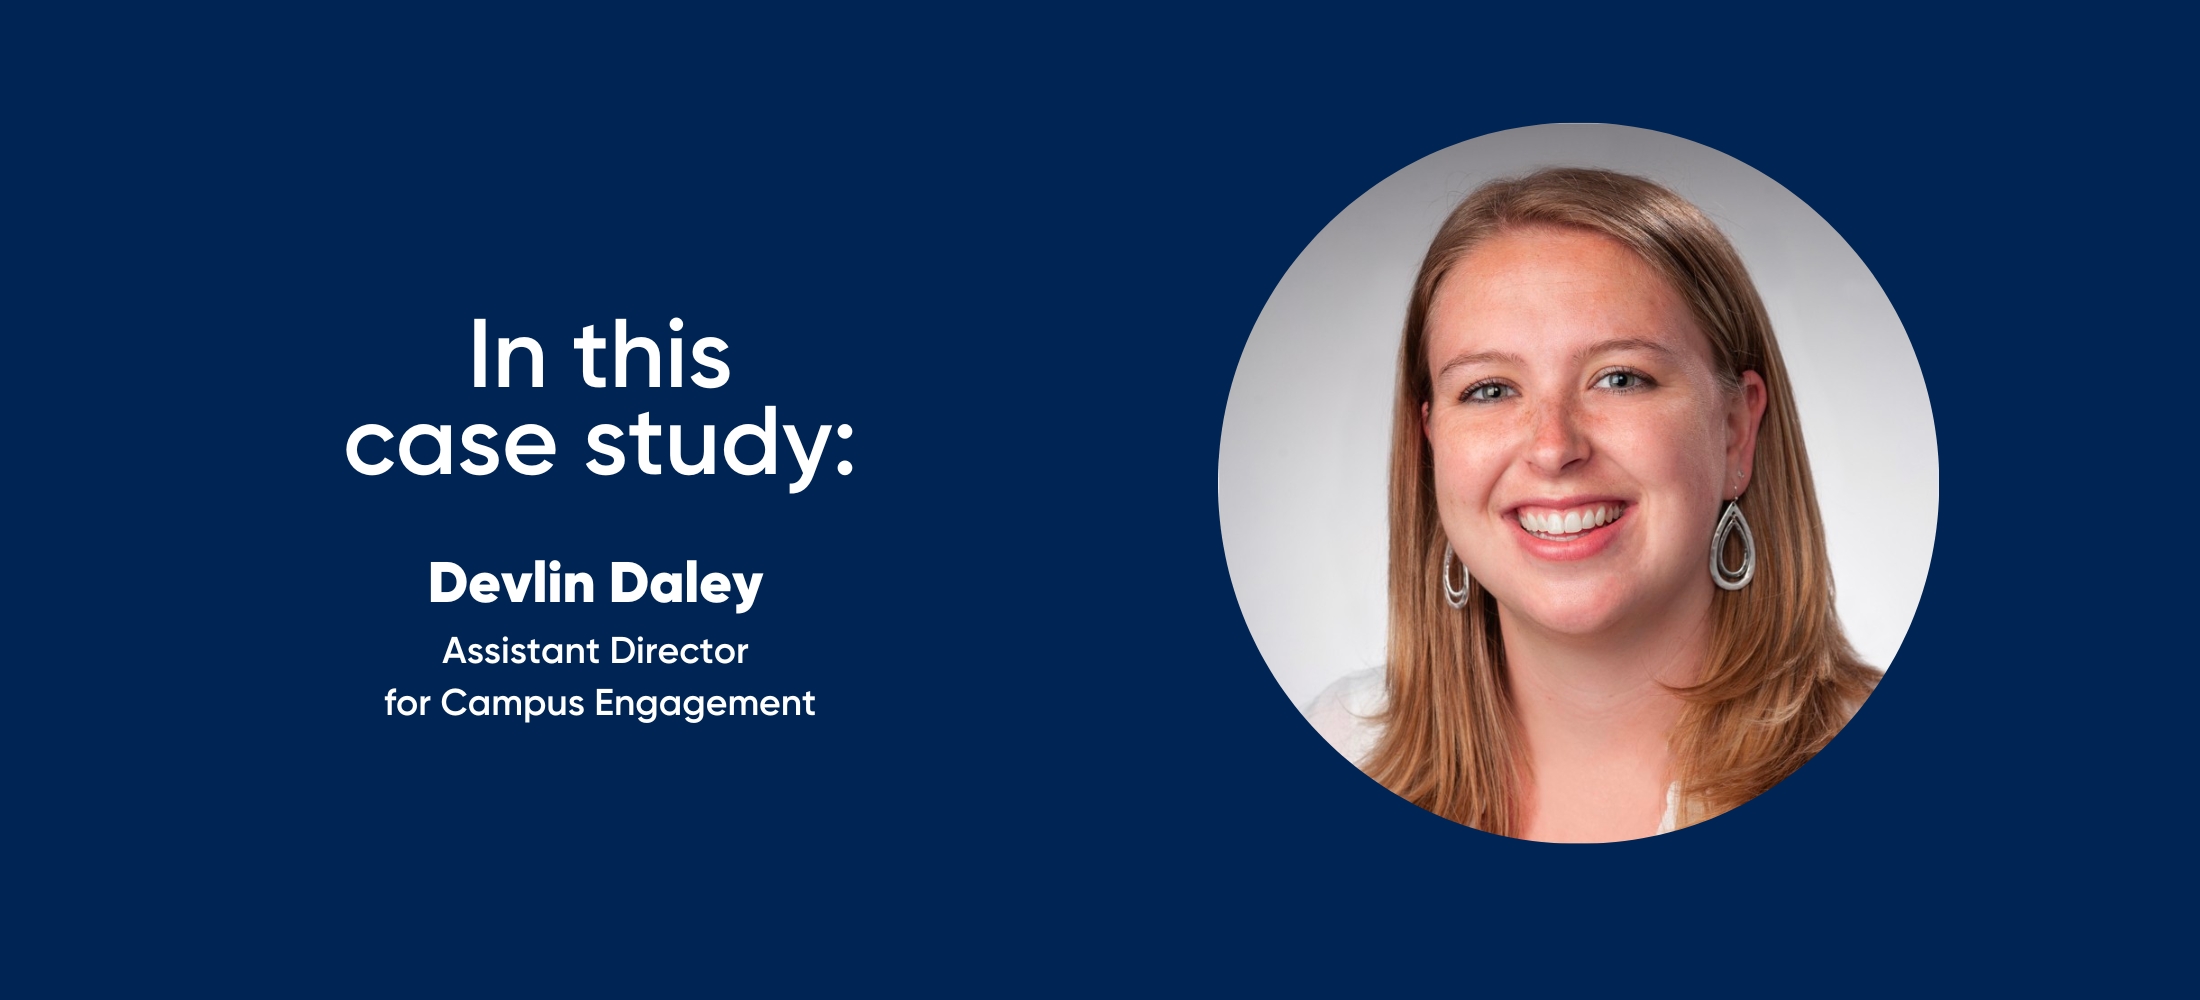 in this case study: Devlin Daley - Assistant Director  for Campus Engagement